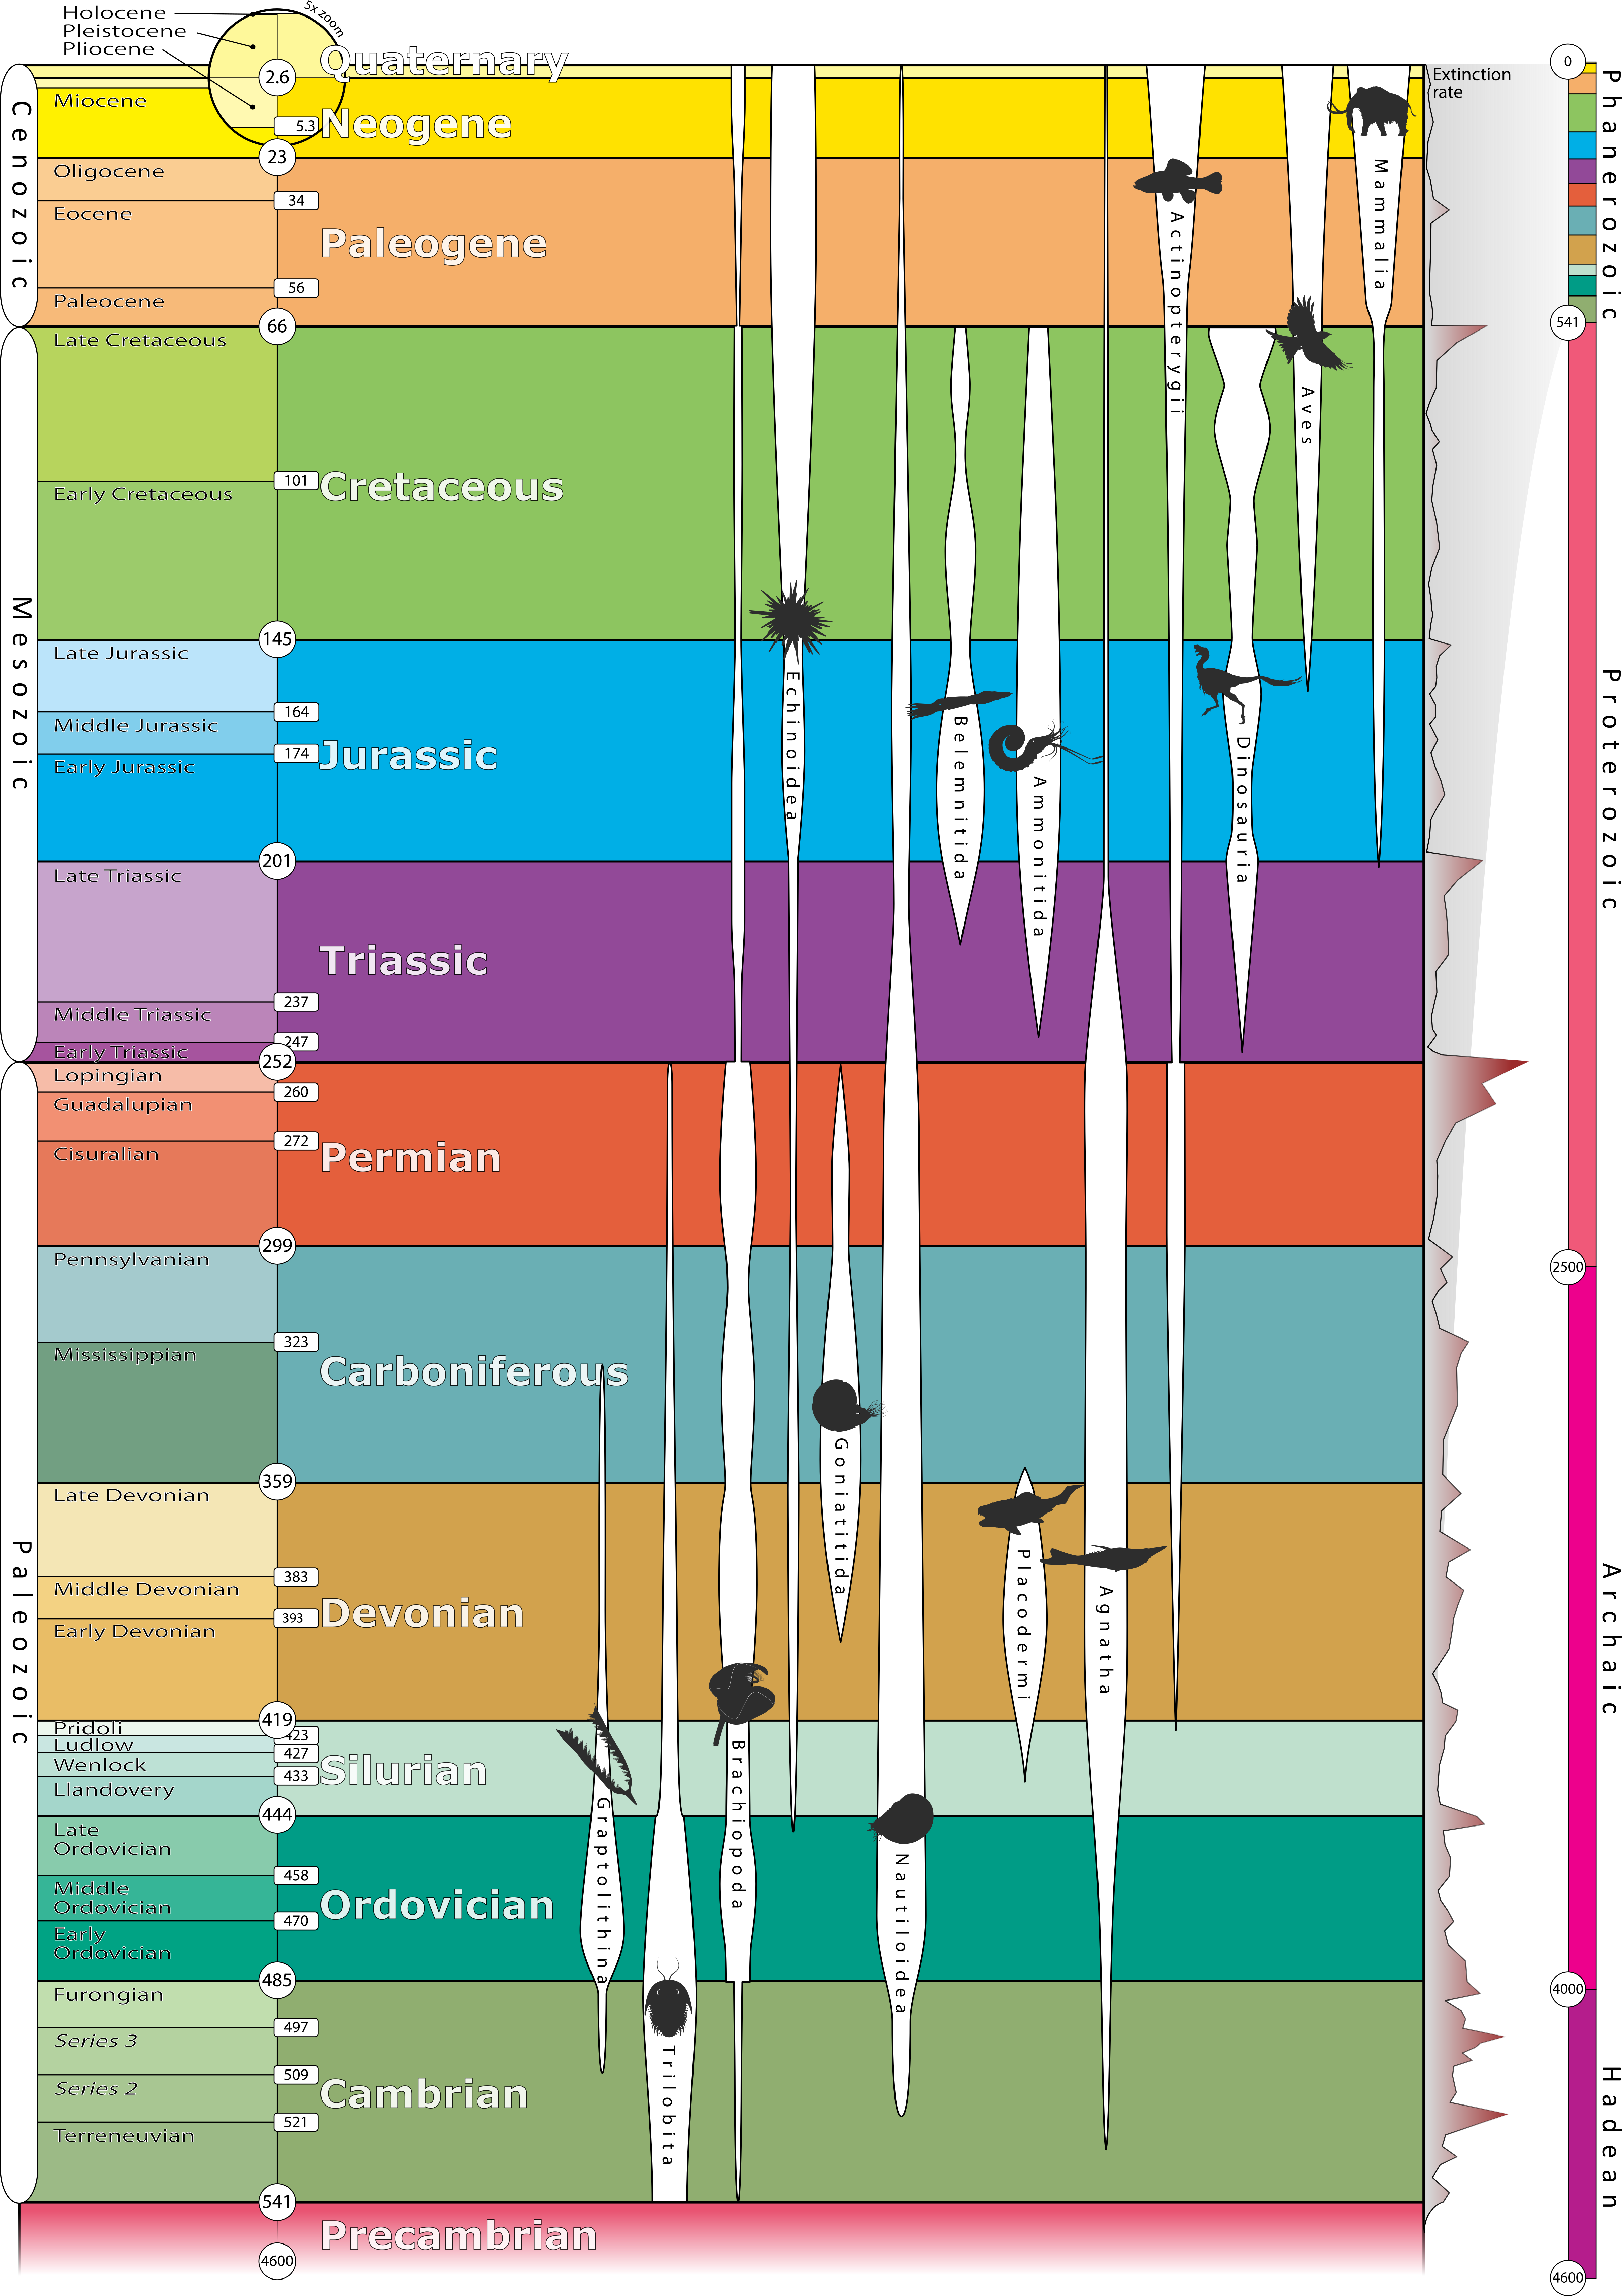 Diagram of the geologic time scale, from the Periods Precambrian through the Quaternary, with a vertical age axis from 4600 to 0 million years; to the right are various index fossils with bars that extend partially or fully through the time scale.